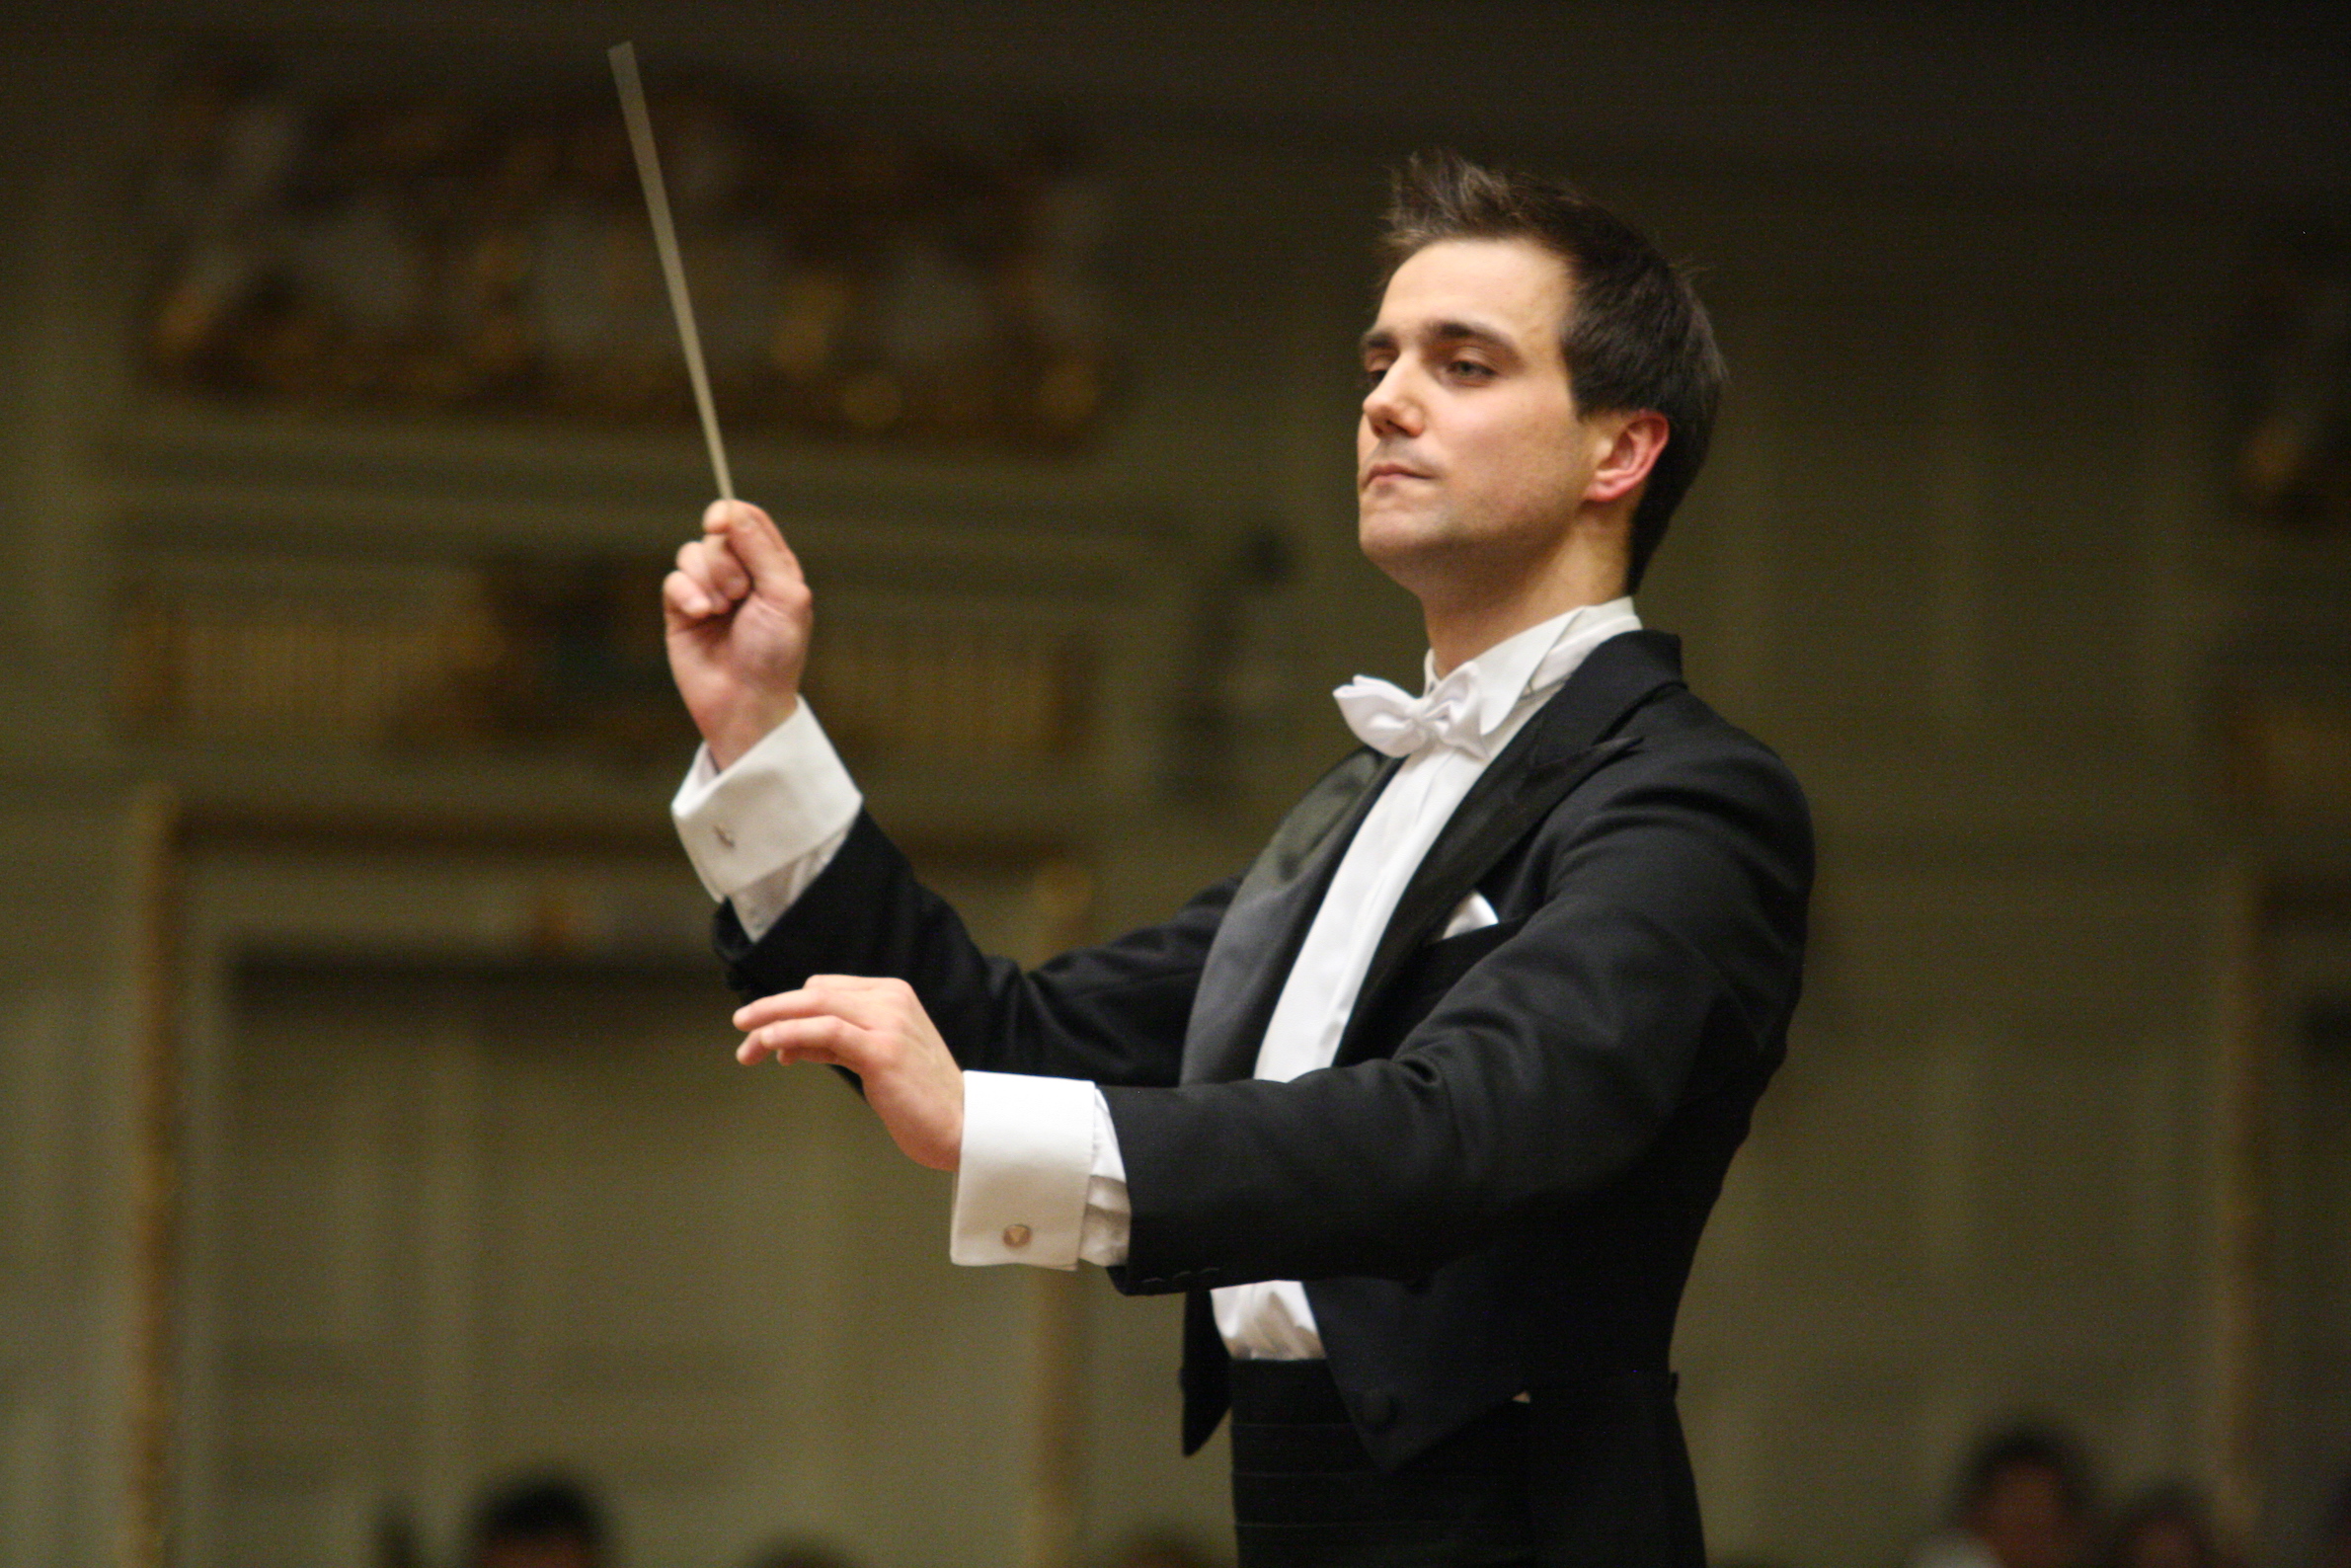 Artist Management Worldwide is delighted to welcome Polish conductor Jakub Chrenowicz to its roster for general management.